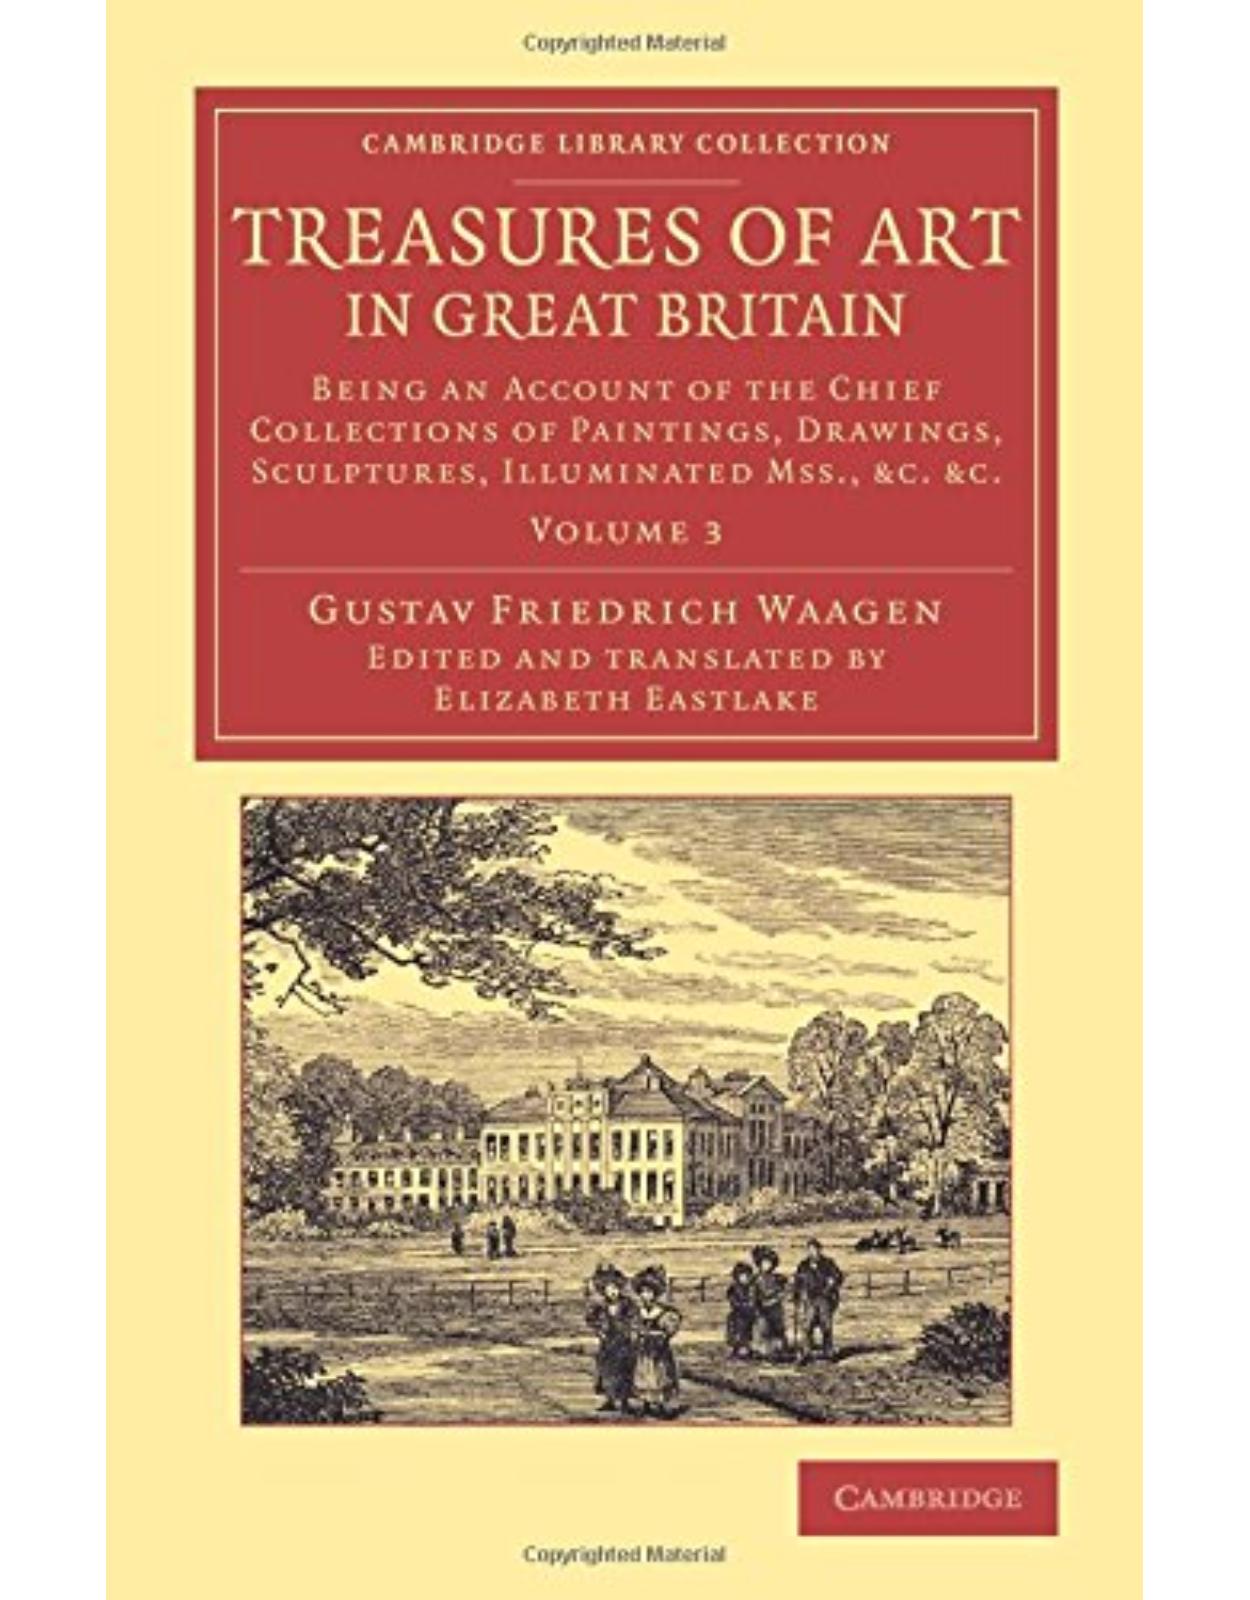 Treasures of Art in Great Britain: Being an Account of the Chief Collections of Paintings, Drawings, Sculptures, Illuminated Mss. (Volume 3)